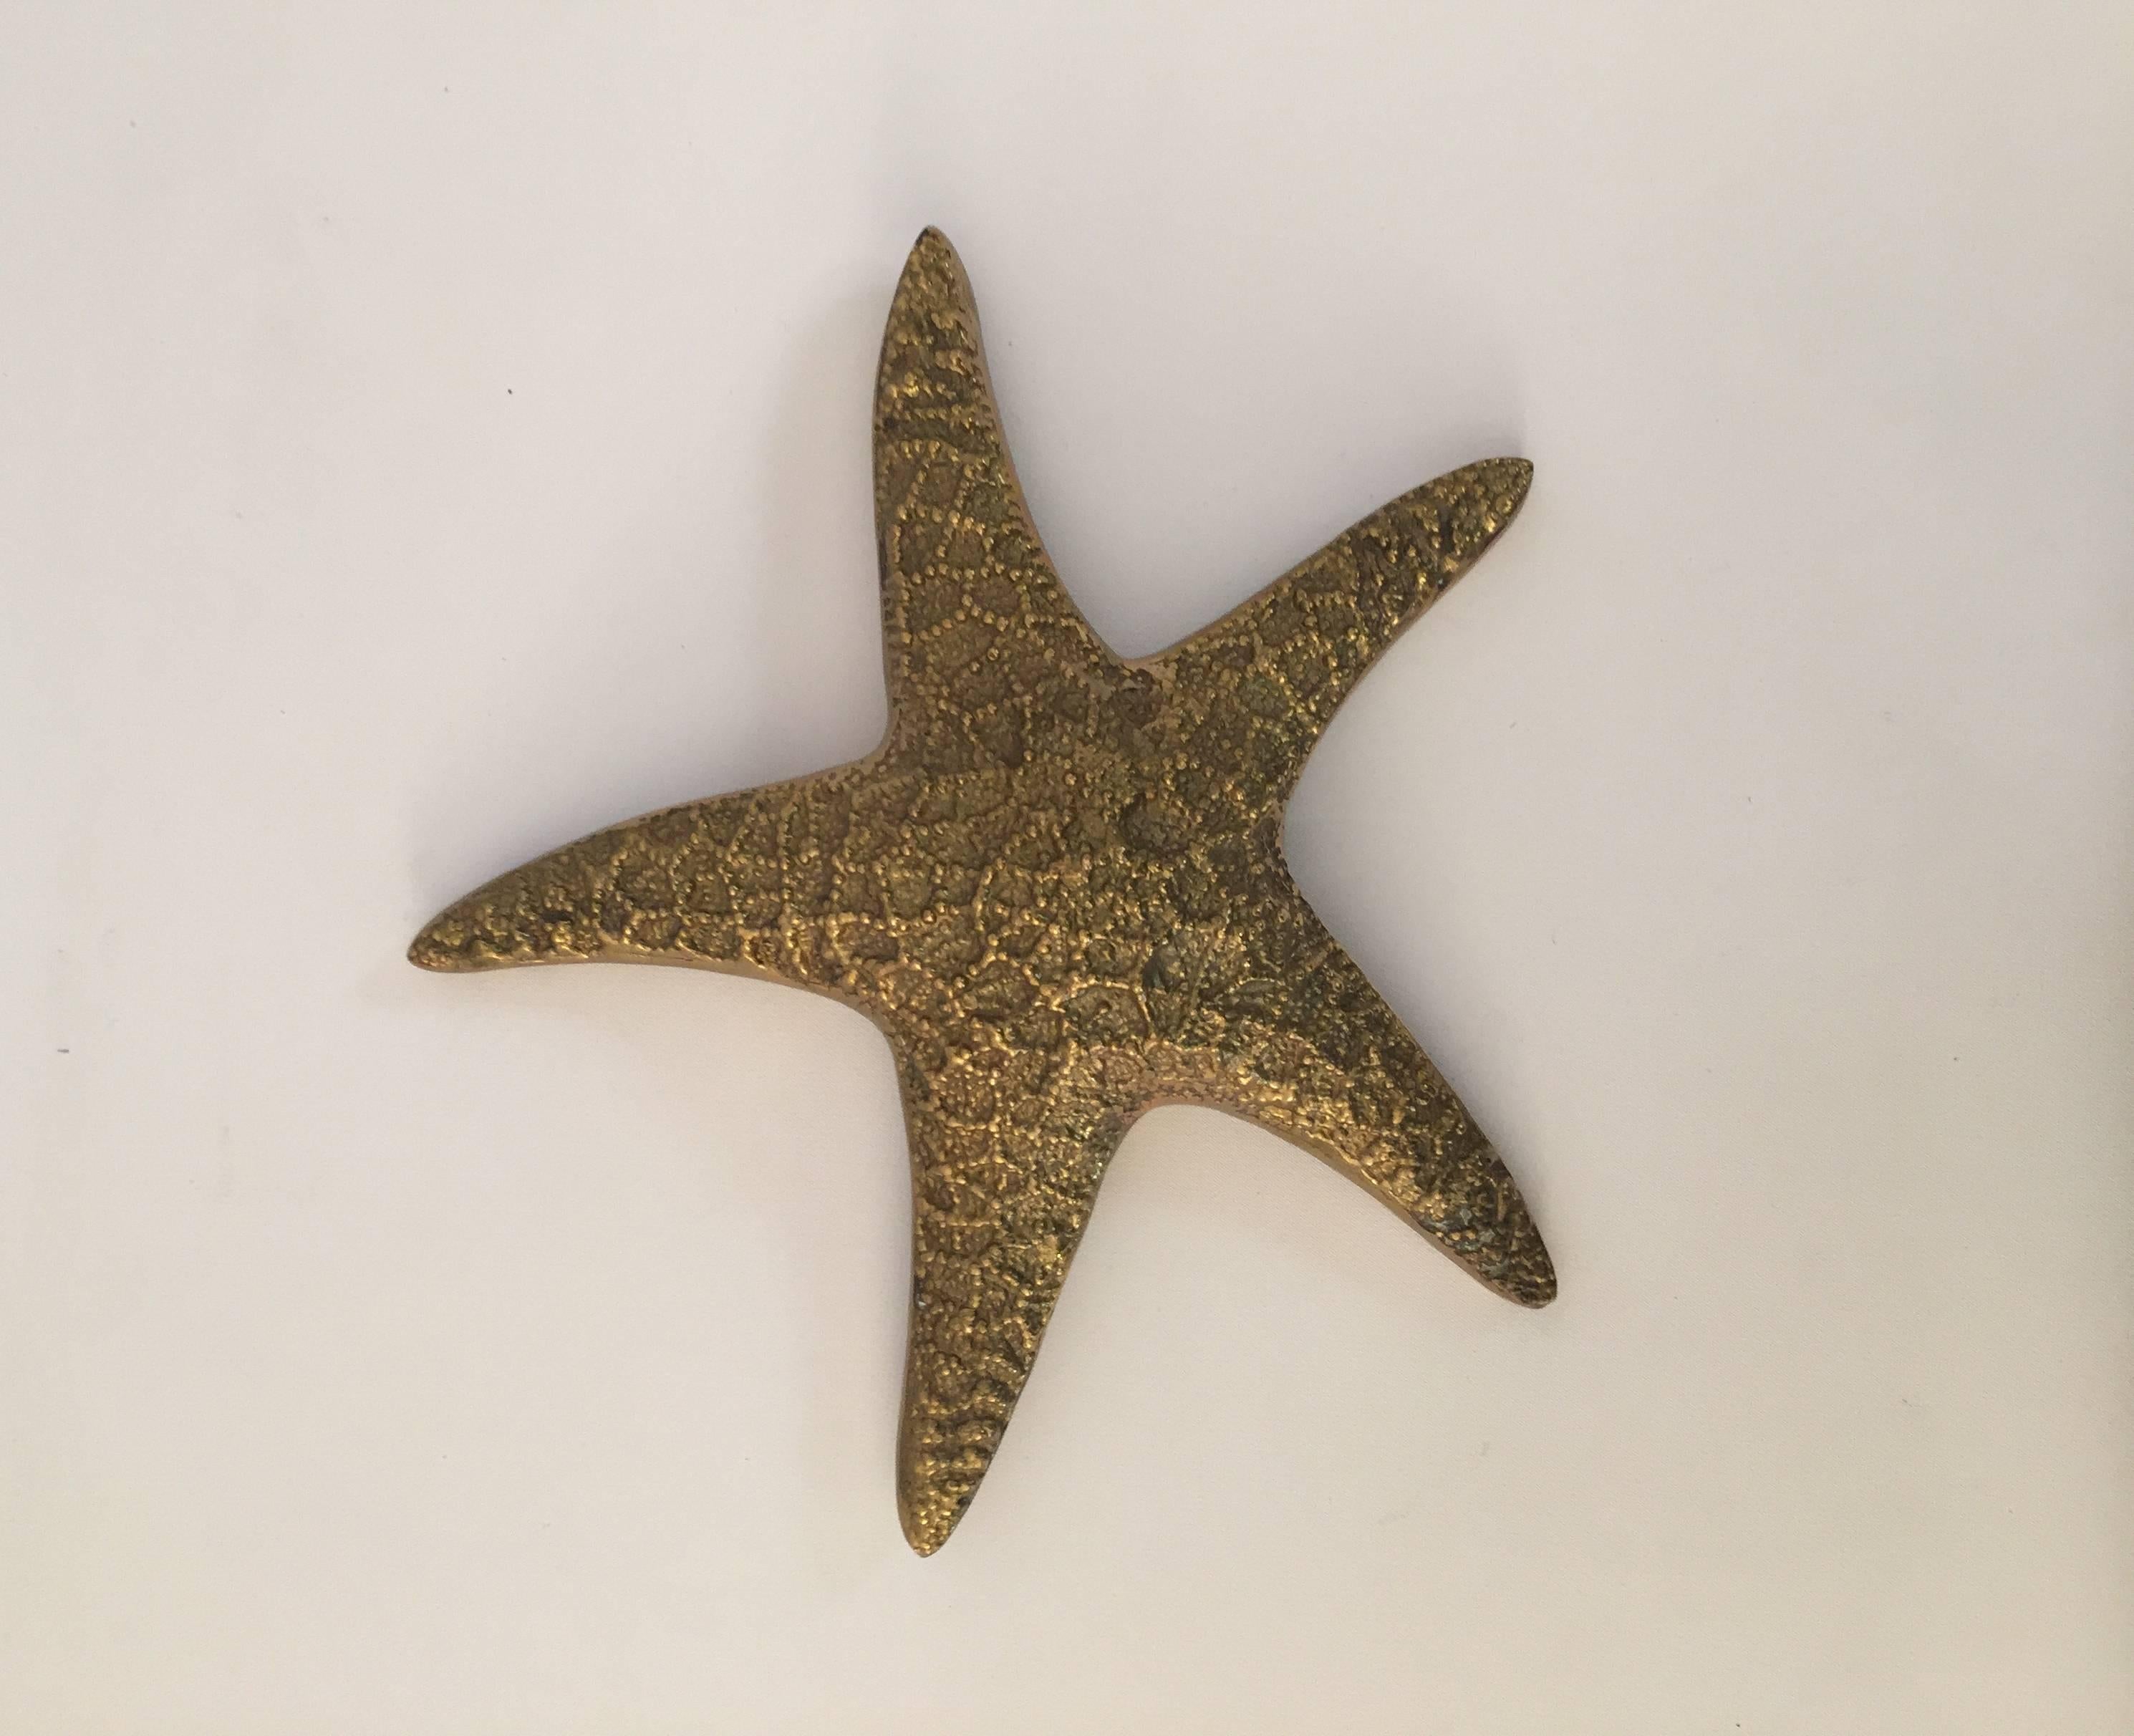 The casting and detail of this metal starfish is amazing, not just on the front, but the back, too. Brass electroplate finish over cast white metal or spelter. Unsigned. Can either compliment a tabletop or be hung on a wall.

10.25